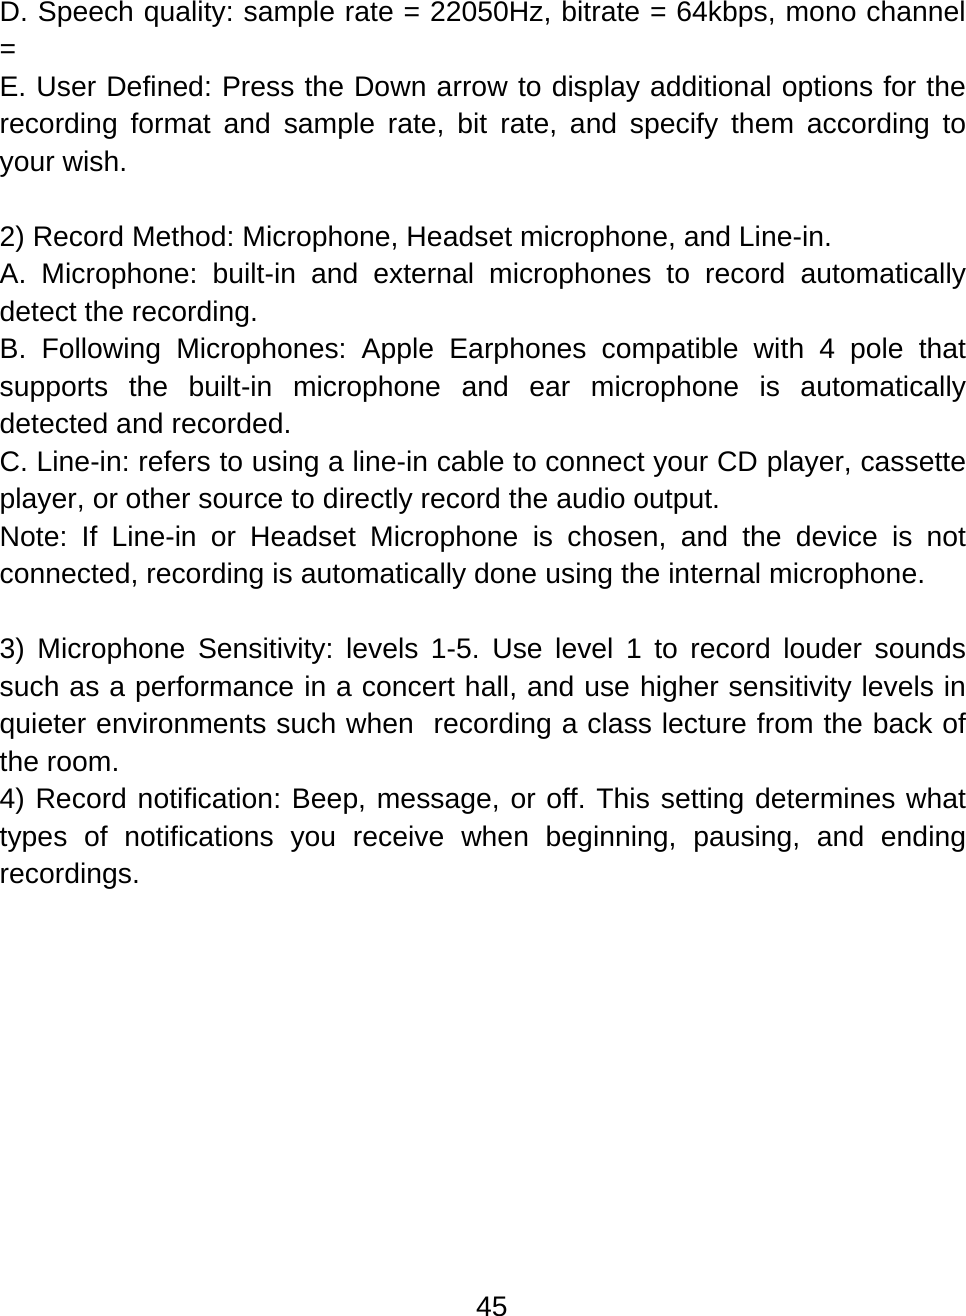 45  D. Speech quality: sample rate = 22050Hz, bitrate = 64kbps, mono channel =  E. User Defined: Press the Down arrow to display additional options for the recording format and sample rate, bit rate, and specify them according to your wish.  2) Record Method: Microphone, Headset microphone, and Line-in. A. Microphone: built-in and external microphones to record automatically detect the recording.  B. Following Microphones: Apple Earphones compatible with 4 pole that supports the built-in microphone and ear microphone is automatically detected and recorded.  C. Line-in: refers to using a line-in cable to connect your CD player, cassette player, or other source to directly record the audio output.  Note: If Line-in or Headset Microphone is chosen, and the device is not connected, recording is automatically done using the internal microphone.  3) Microphone Sensitivity: levels 1-5. Use level 1 to record louder sounds such as a performance in a concert hall, and use higher sensitivity levels in quieter environments such when  recording a class lecture from the back of the room. 4) Record notification: Beep, message, or off. This setting determines what types of notifications you receive when beginning, pausing, and ending recordings.  